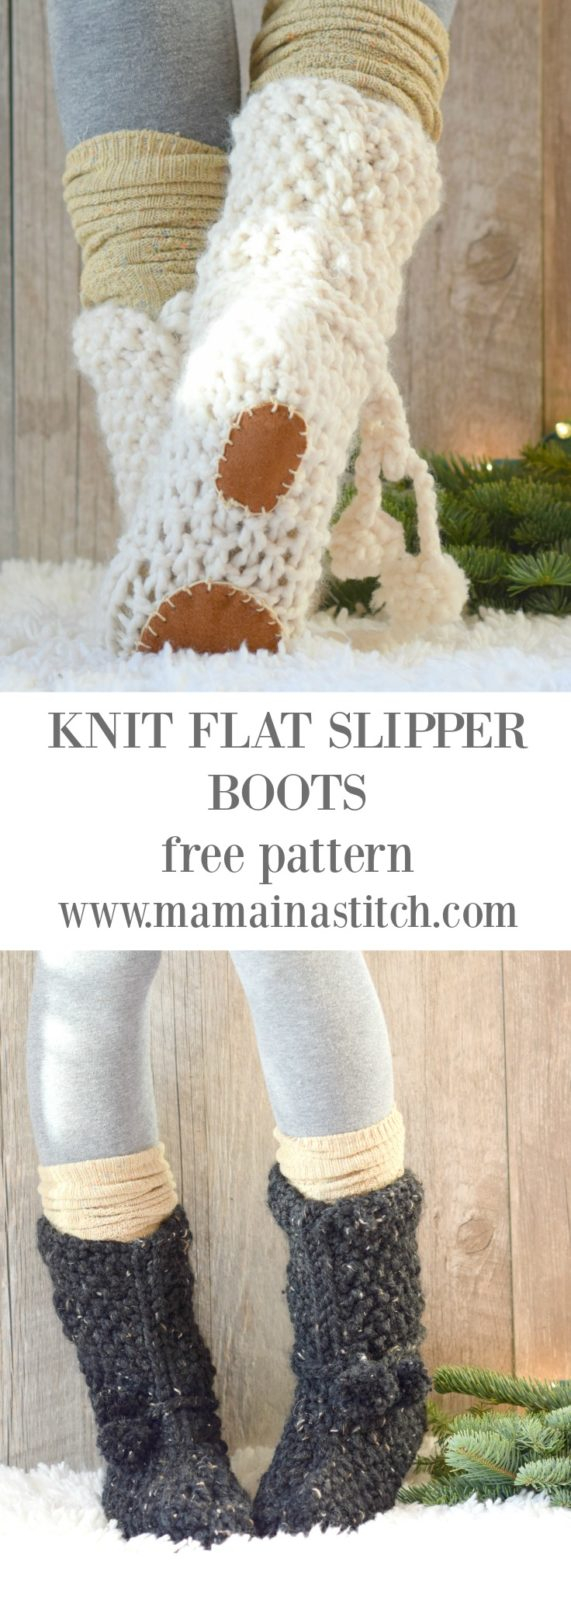 Free Patterns For Knitted Slippers Mountain Chalet Boot Slipper Knitting Pattern Knit Flat Mama In